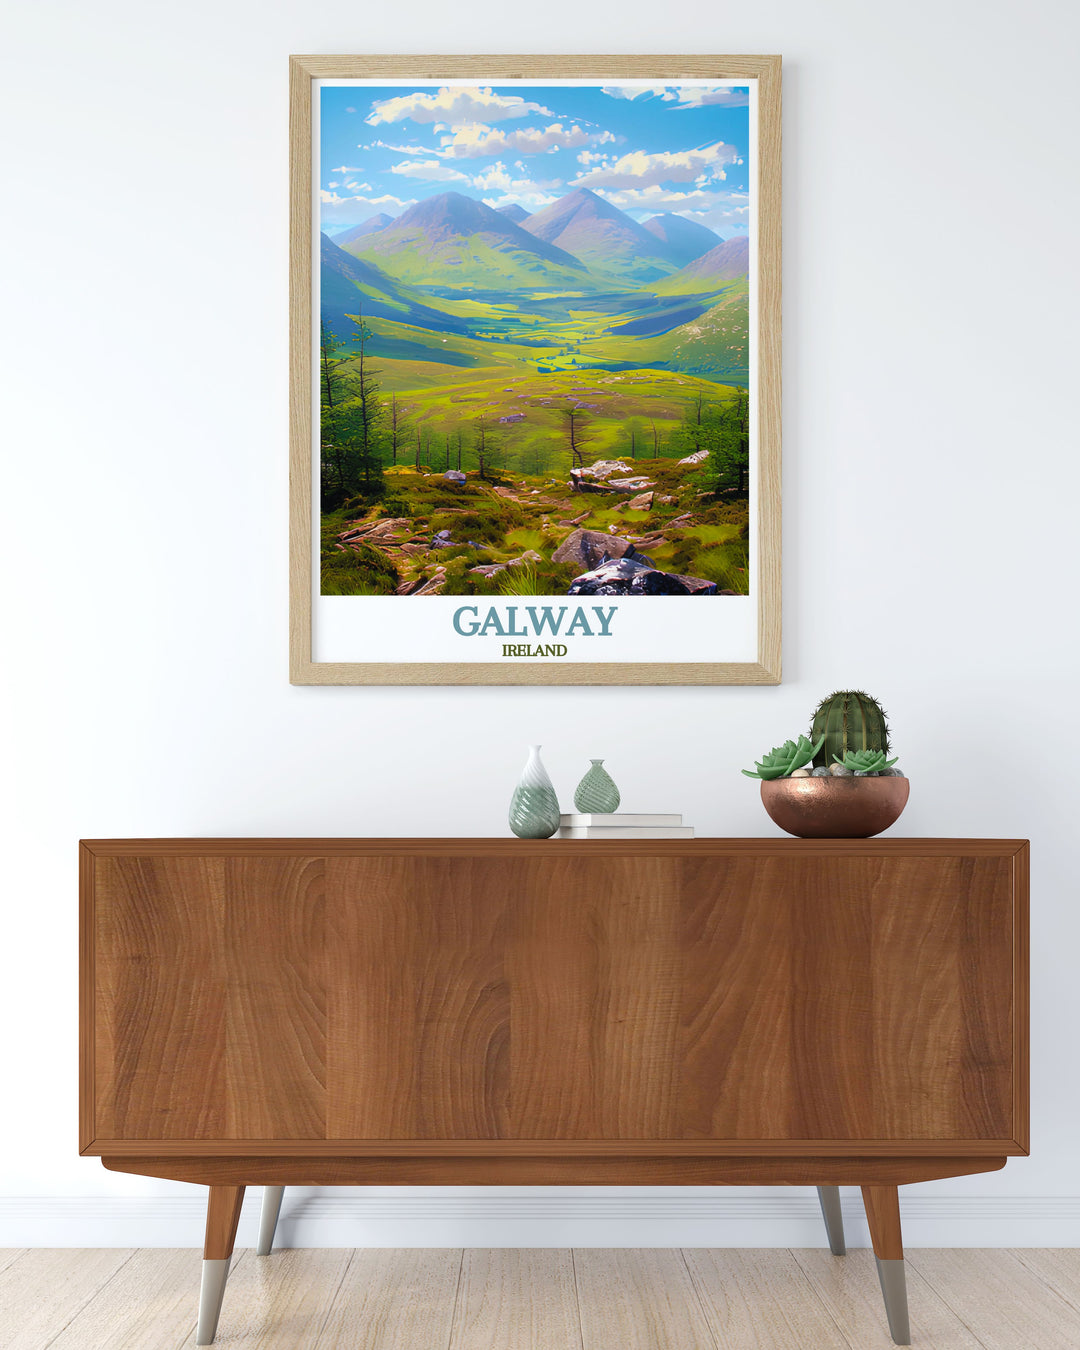 This detailed art print brings to life the serene and dramatic landscapes of Connemara National Park. Featuring sweeping valleys, bogs, and grasslands, this poster is ideal for those who dream of exploring Irelands unspoiled wilderness and scenic beauty.